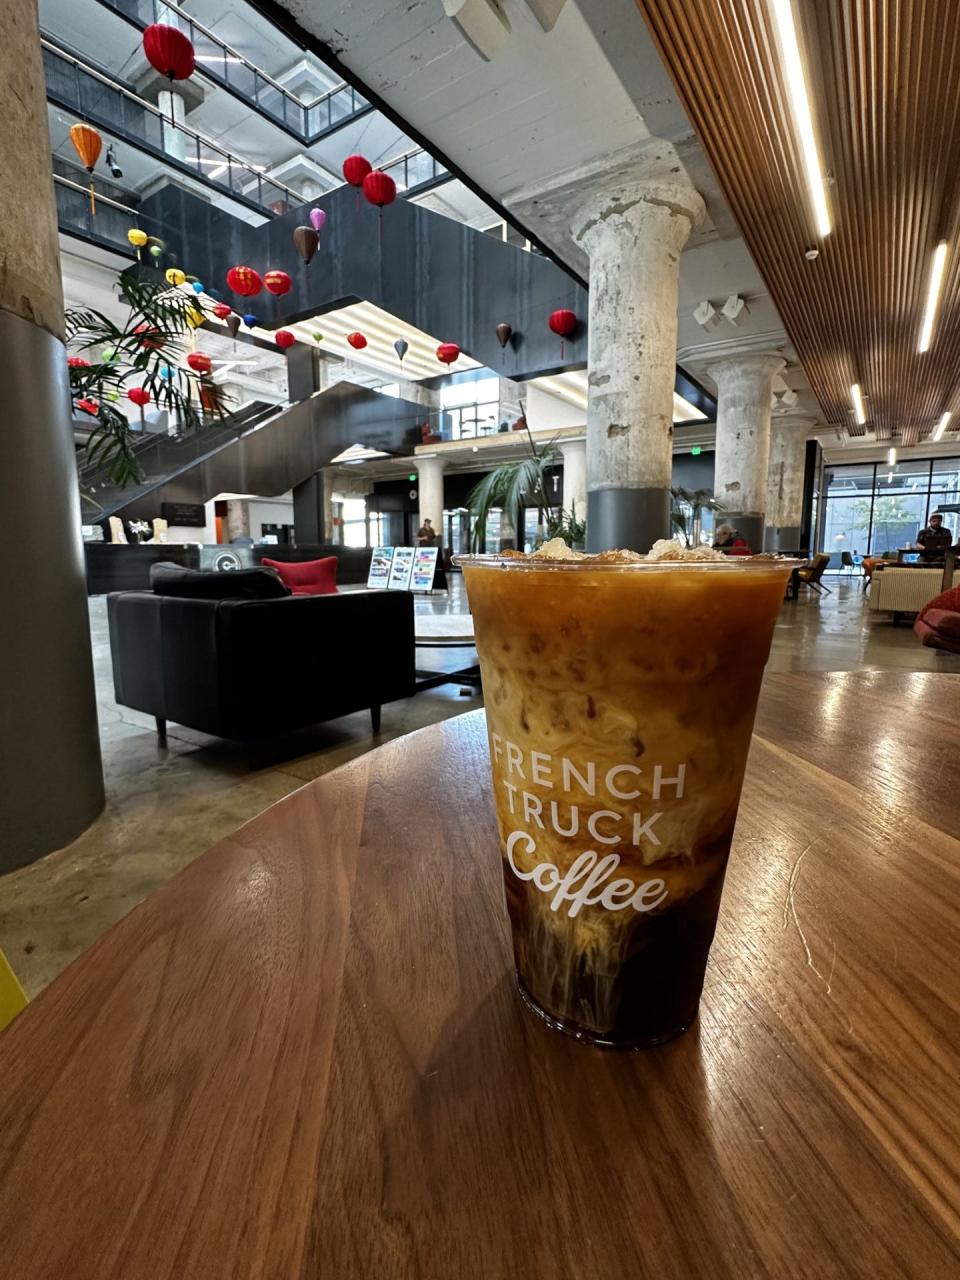 At French Truck's Crosstown Concourse location, you can order an oji cold brew. The Japanese brewing method can take up to 18 hours while room temperature water slowly drips into fresh coffee grounds. 
The result is an unbelievably smooth cold brew, often with notes of citrus. 
It's perfect with or without cream.